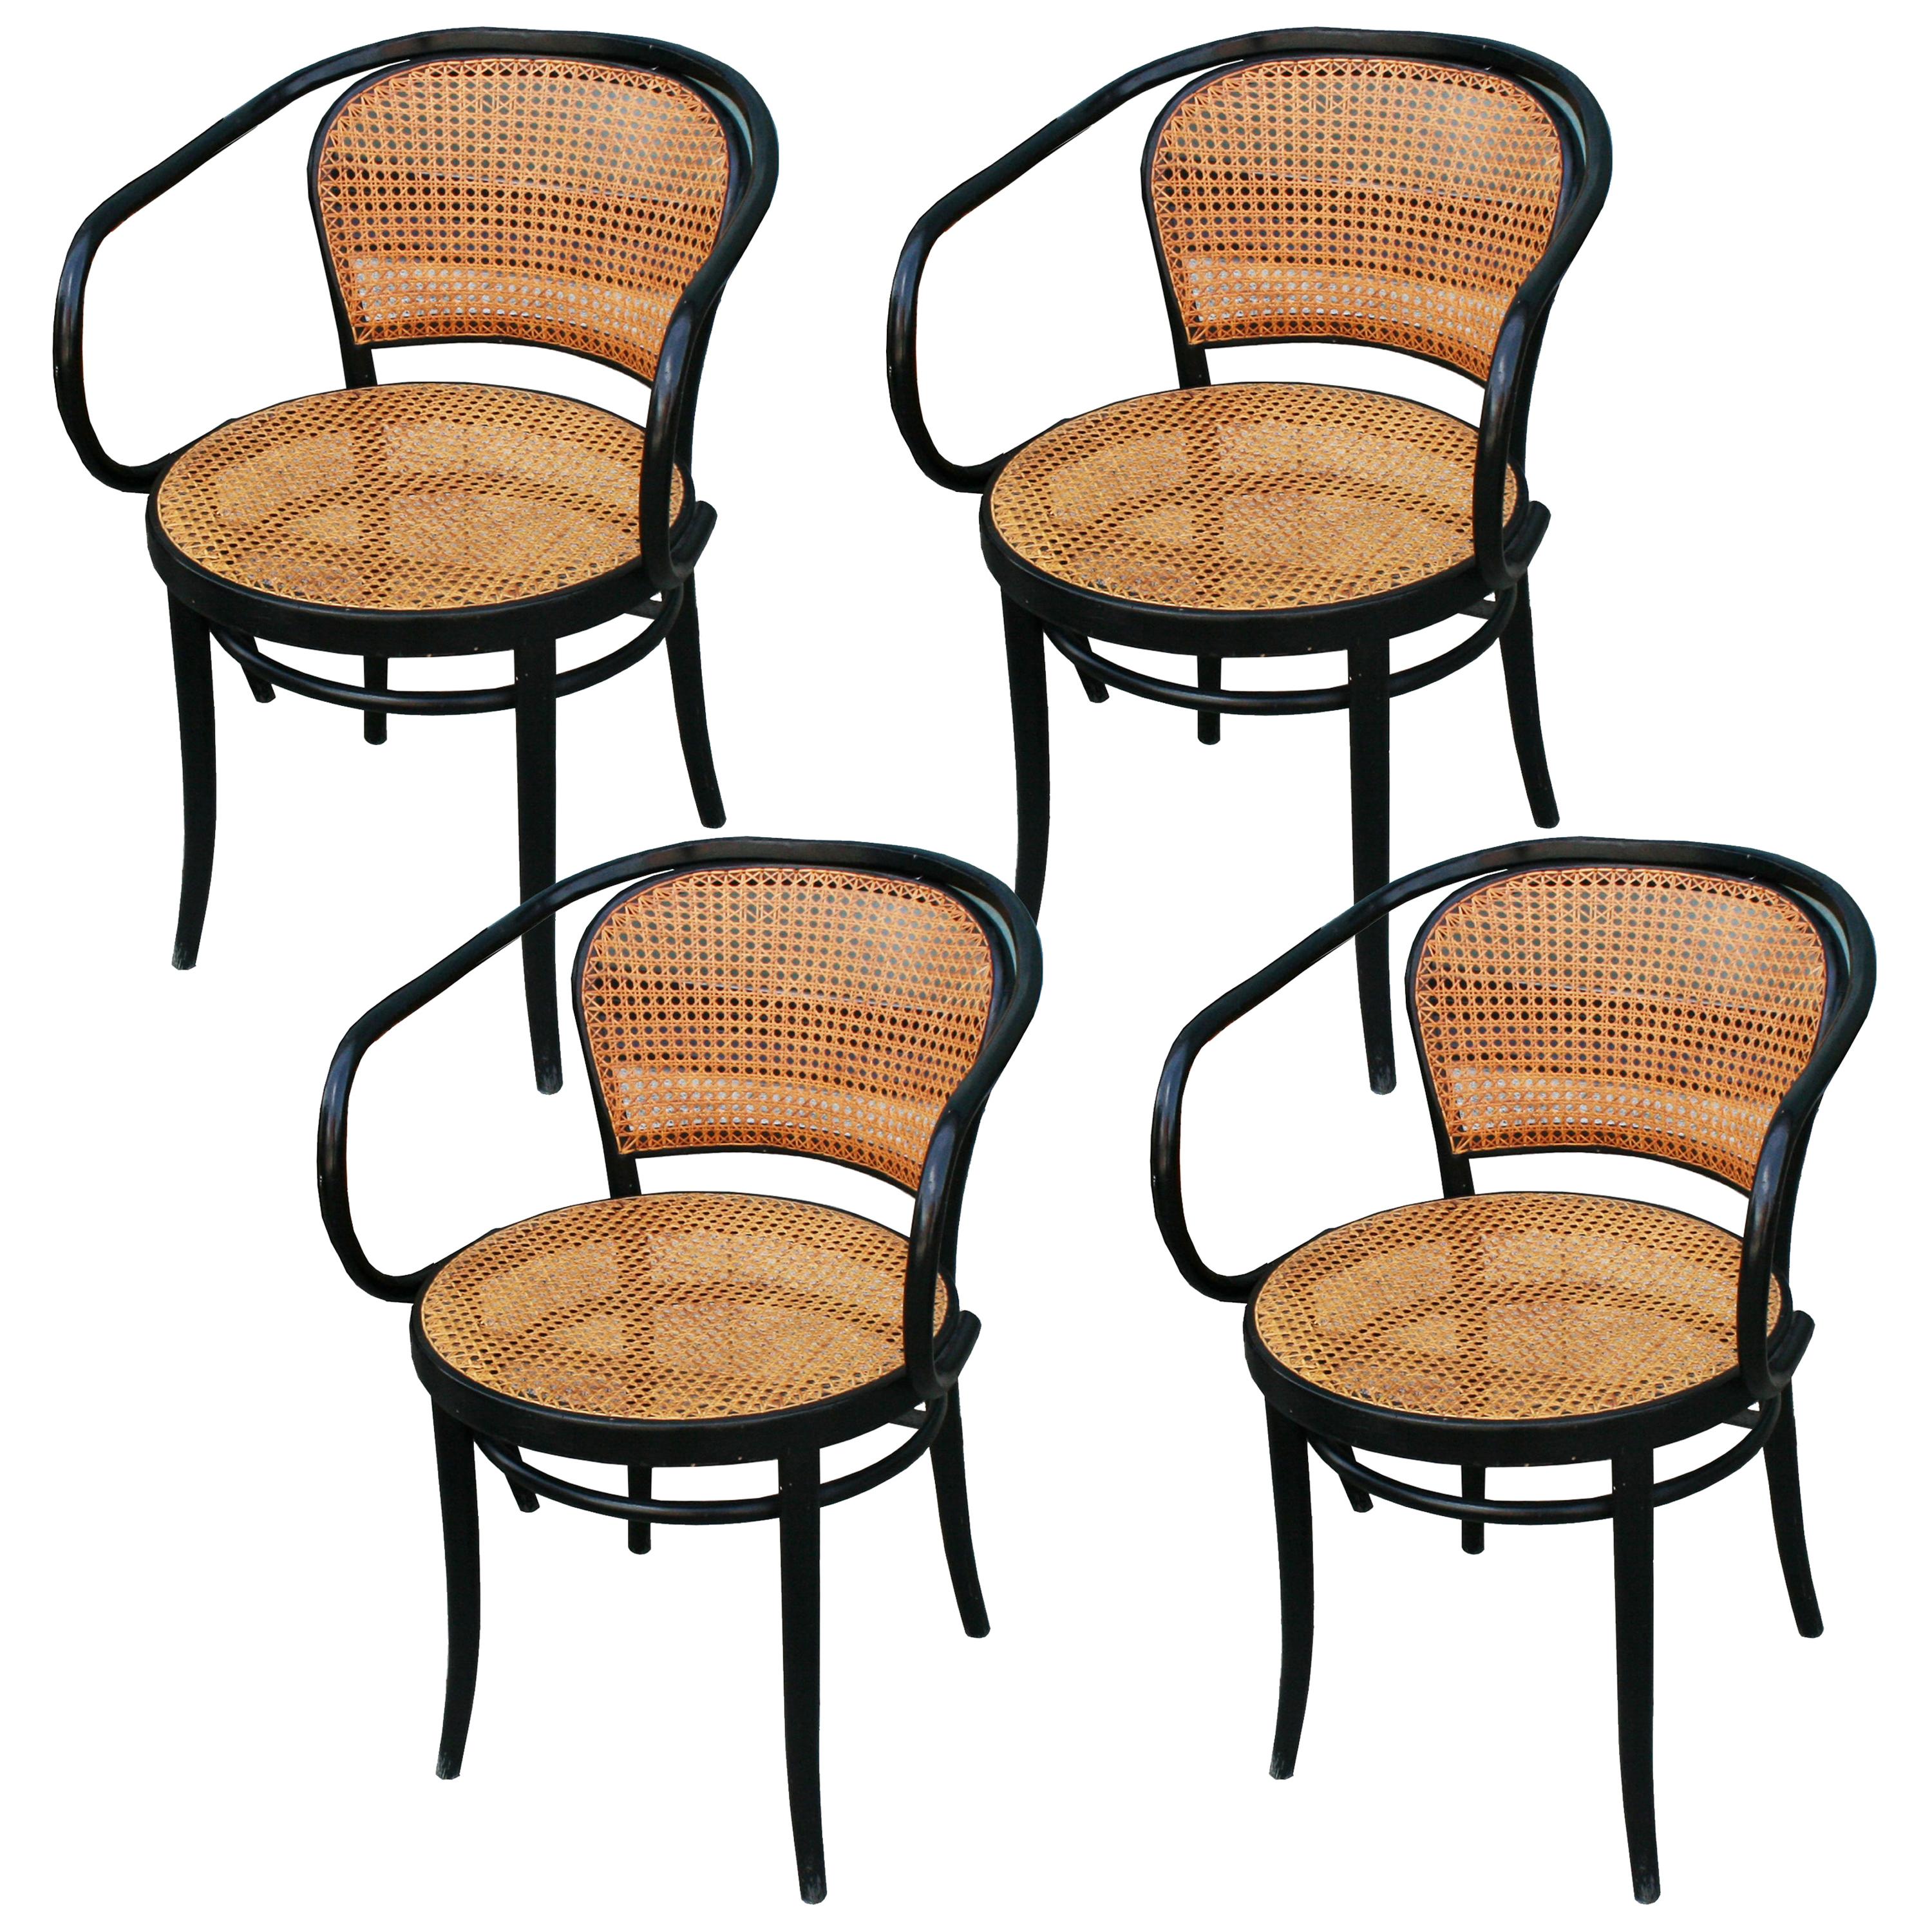 August Thonet Chairs B9 Set of 4 , Czech Republic, Early 20th Century